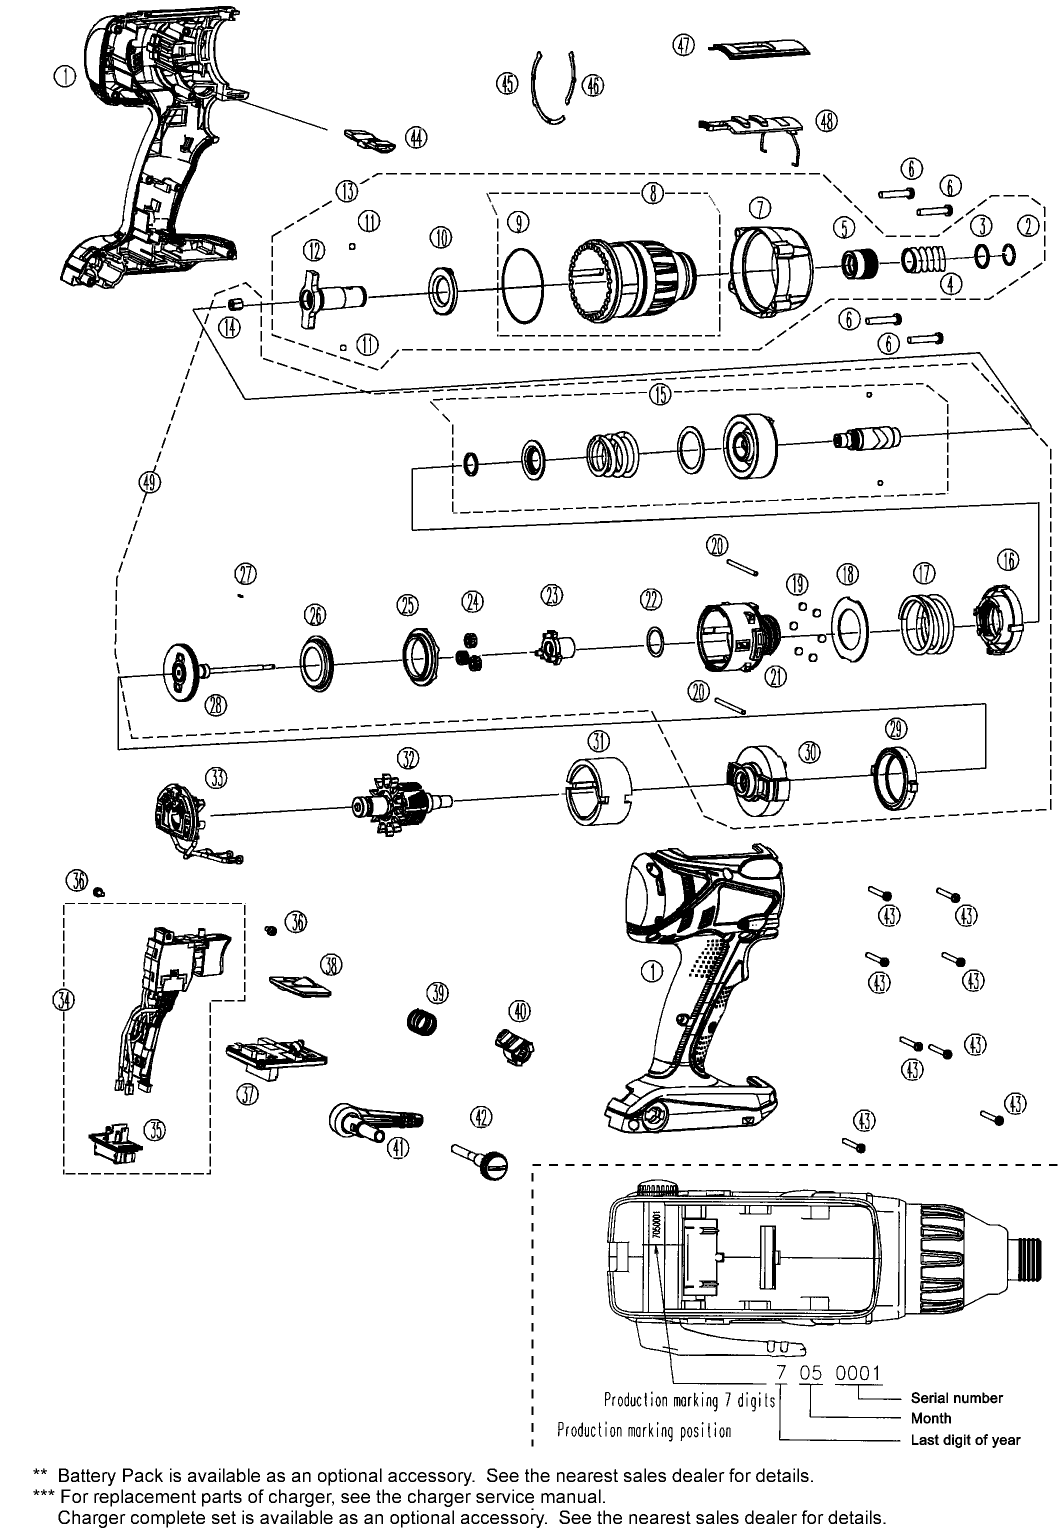 EY7542: Exploded View